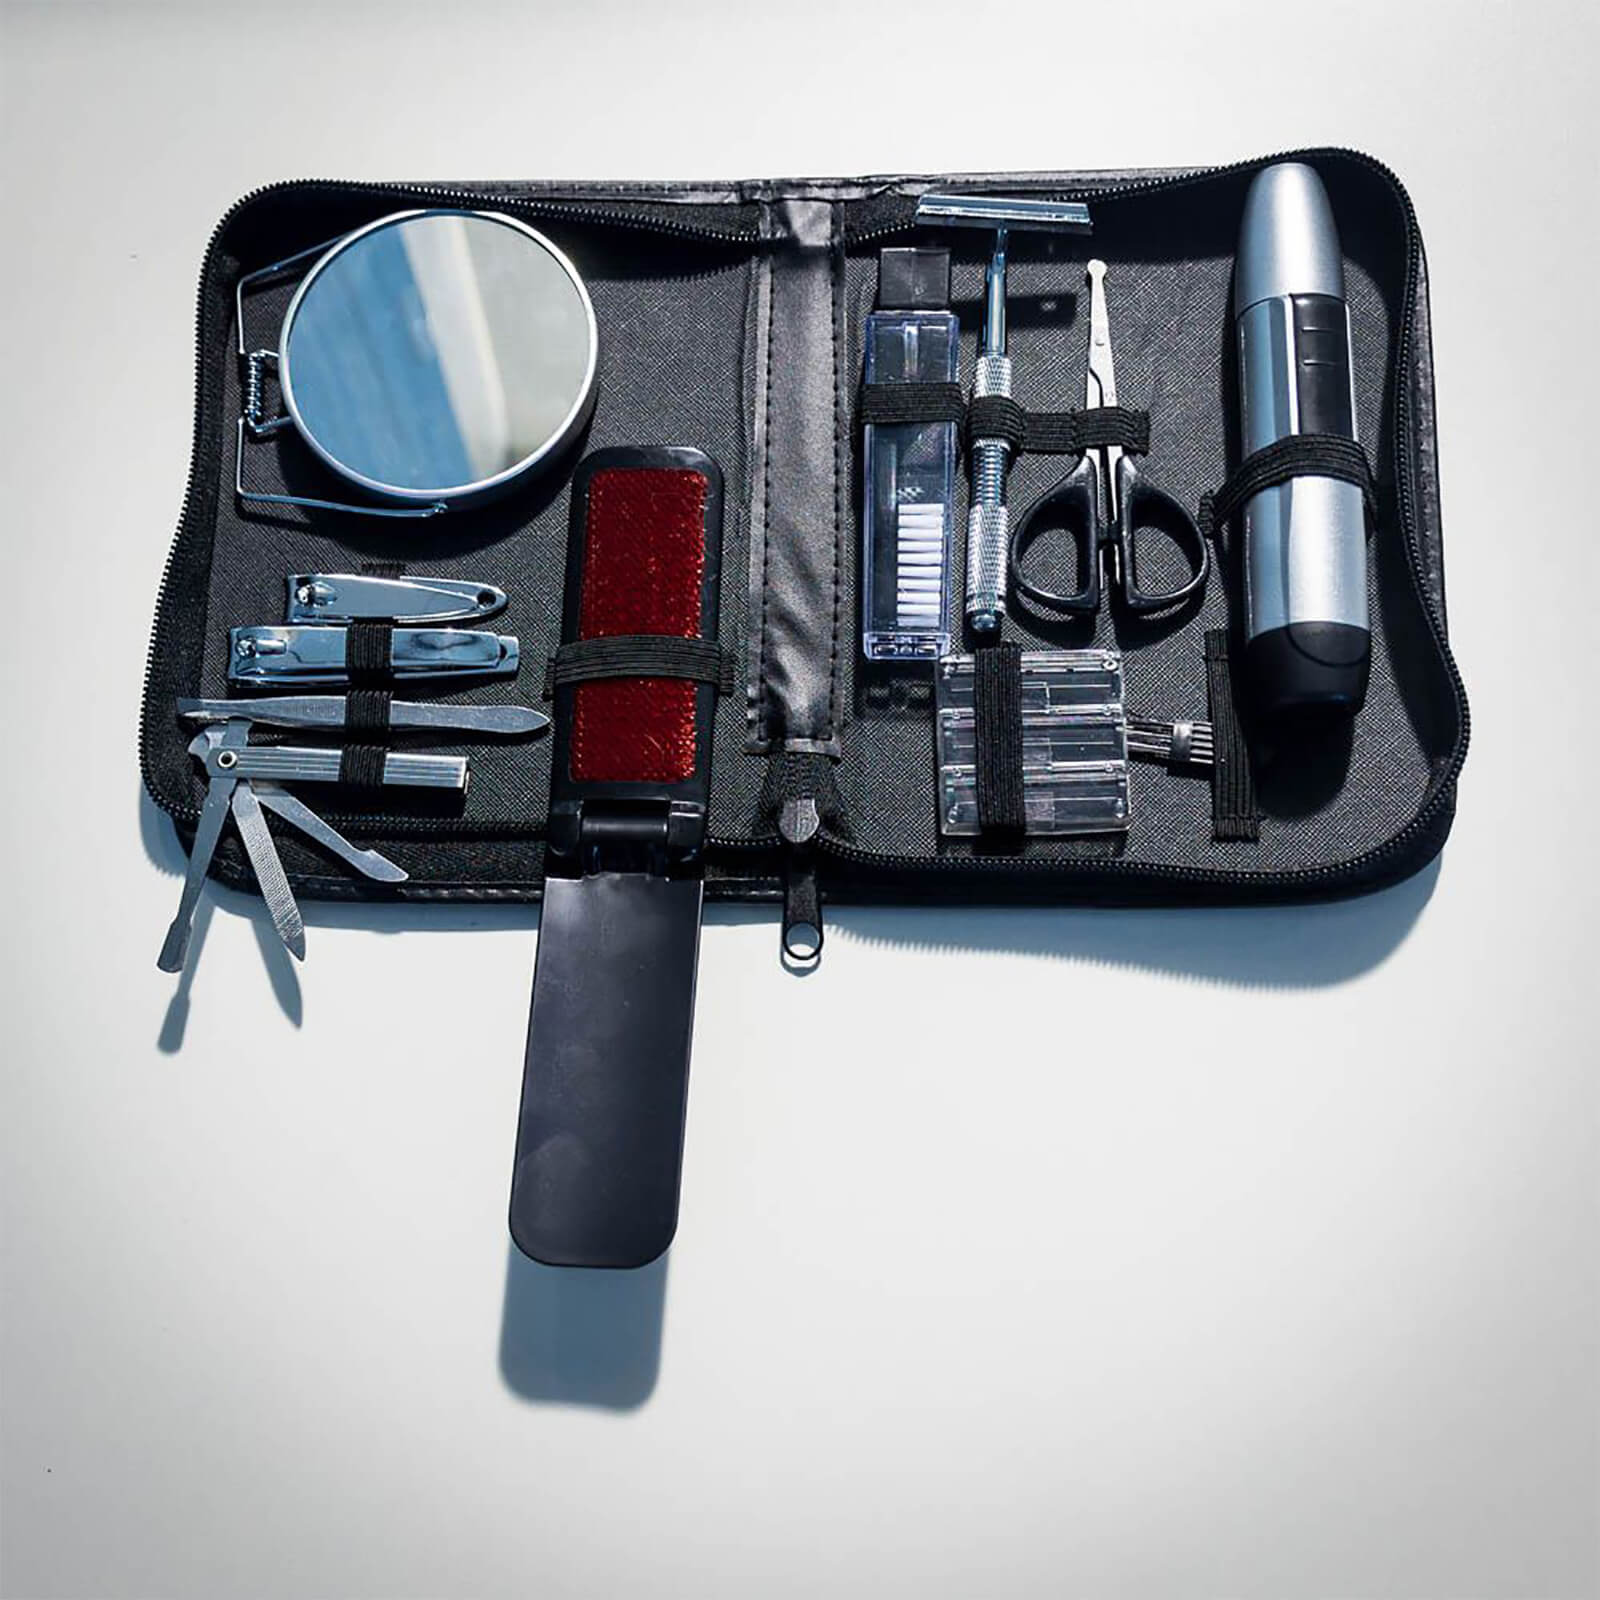 Image of Grooming Kit with Trimmer